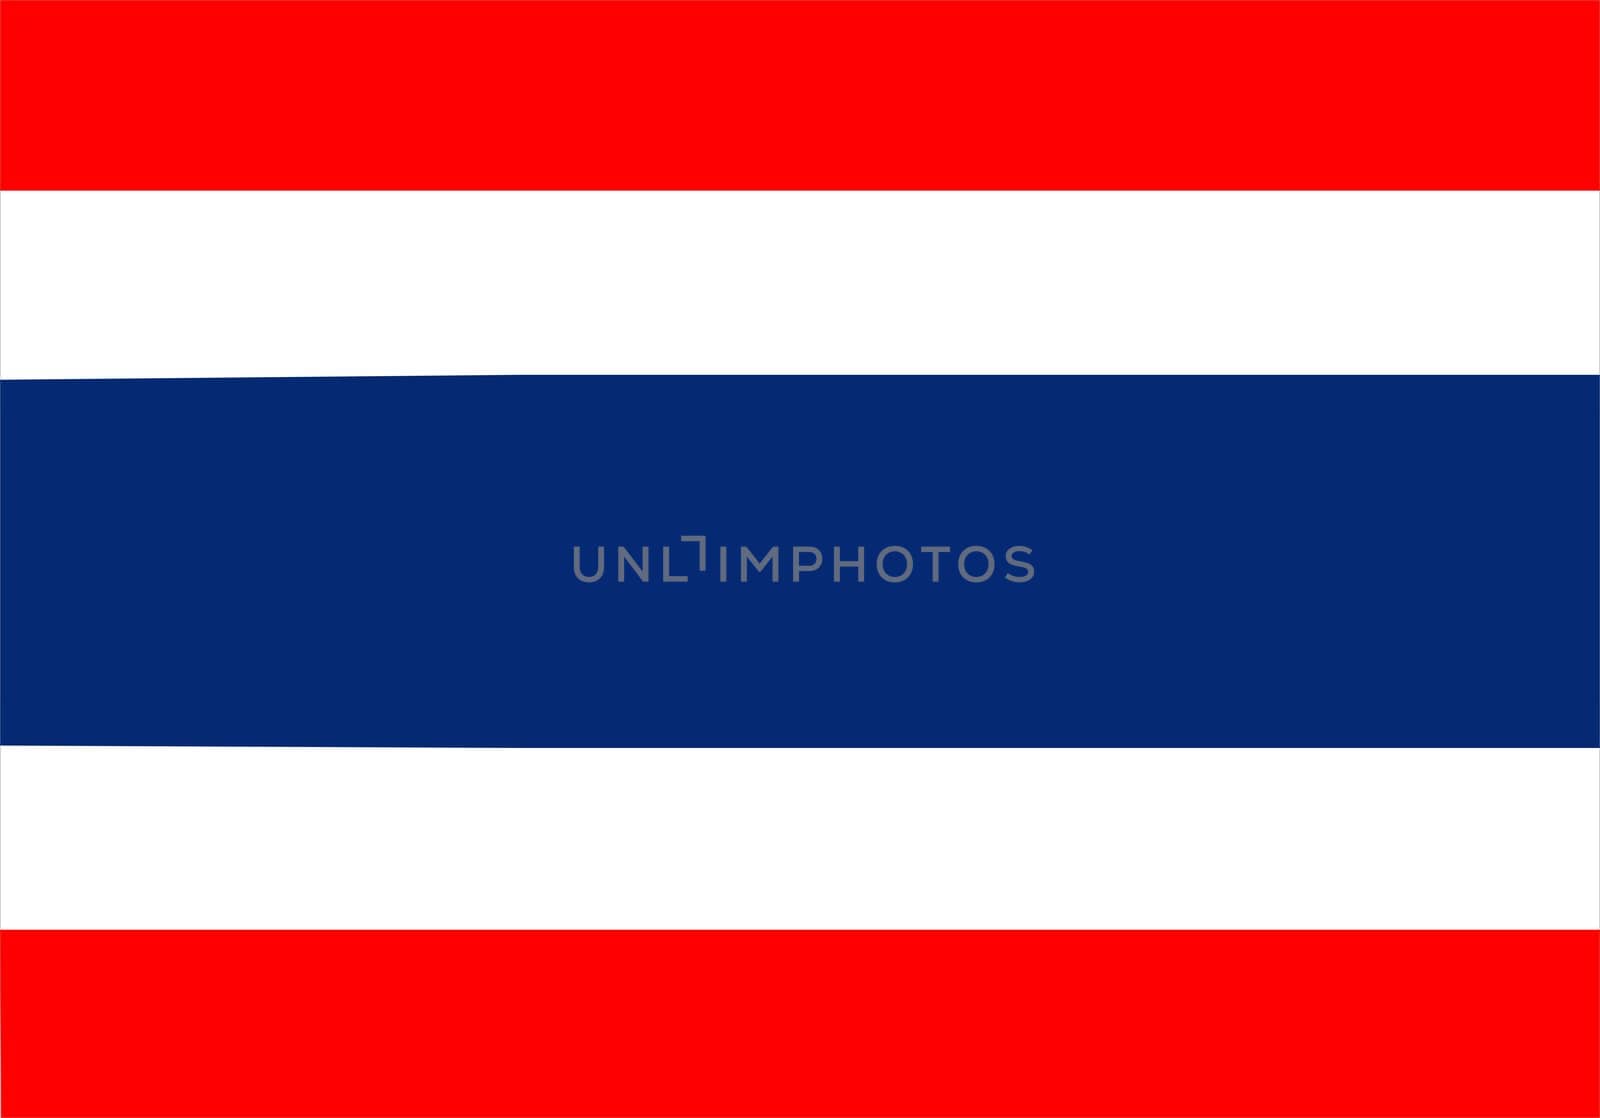 2D illustration of the flag of thailand